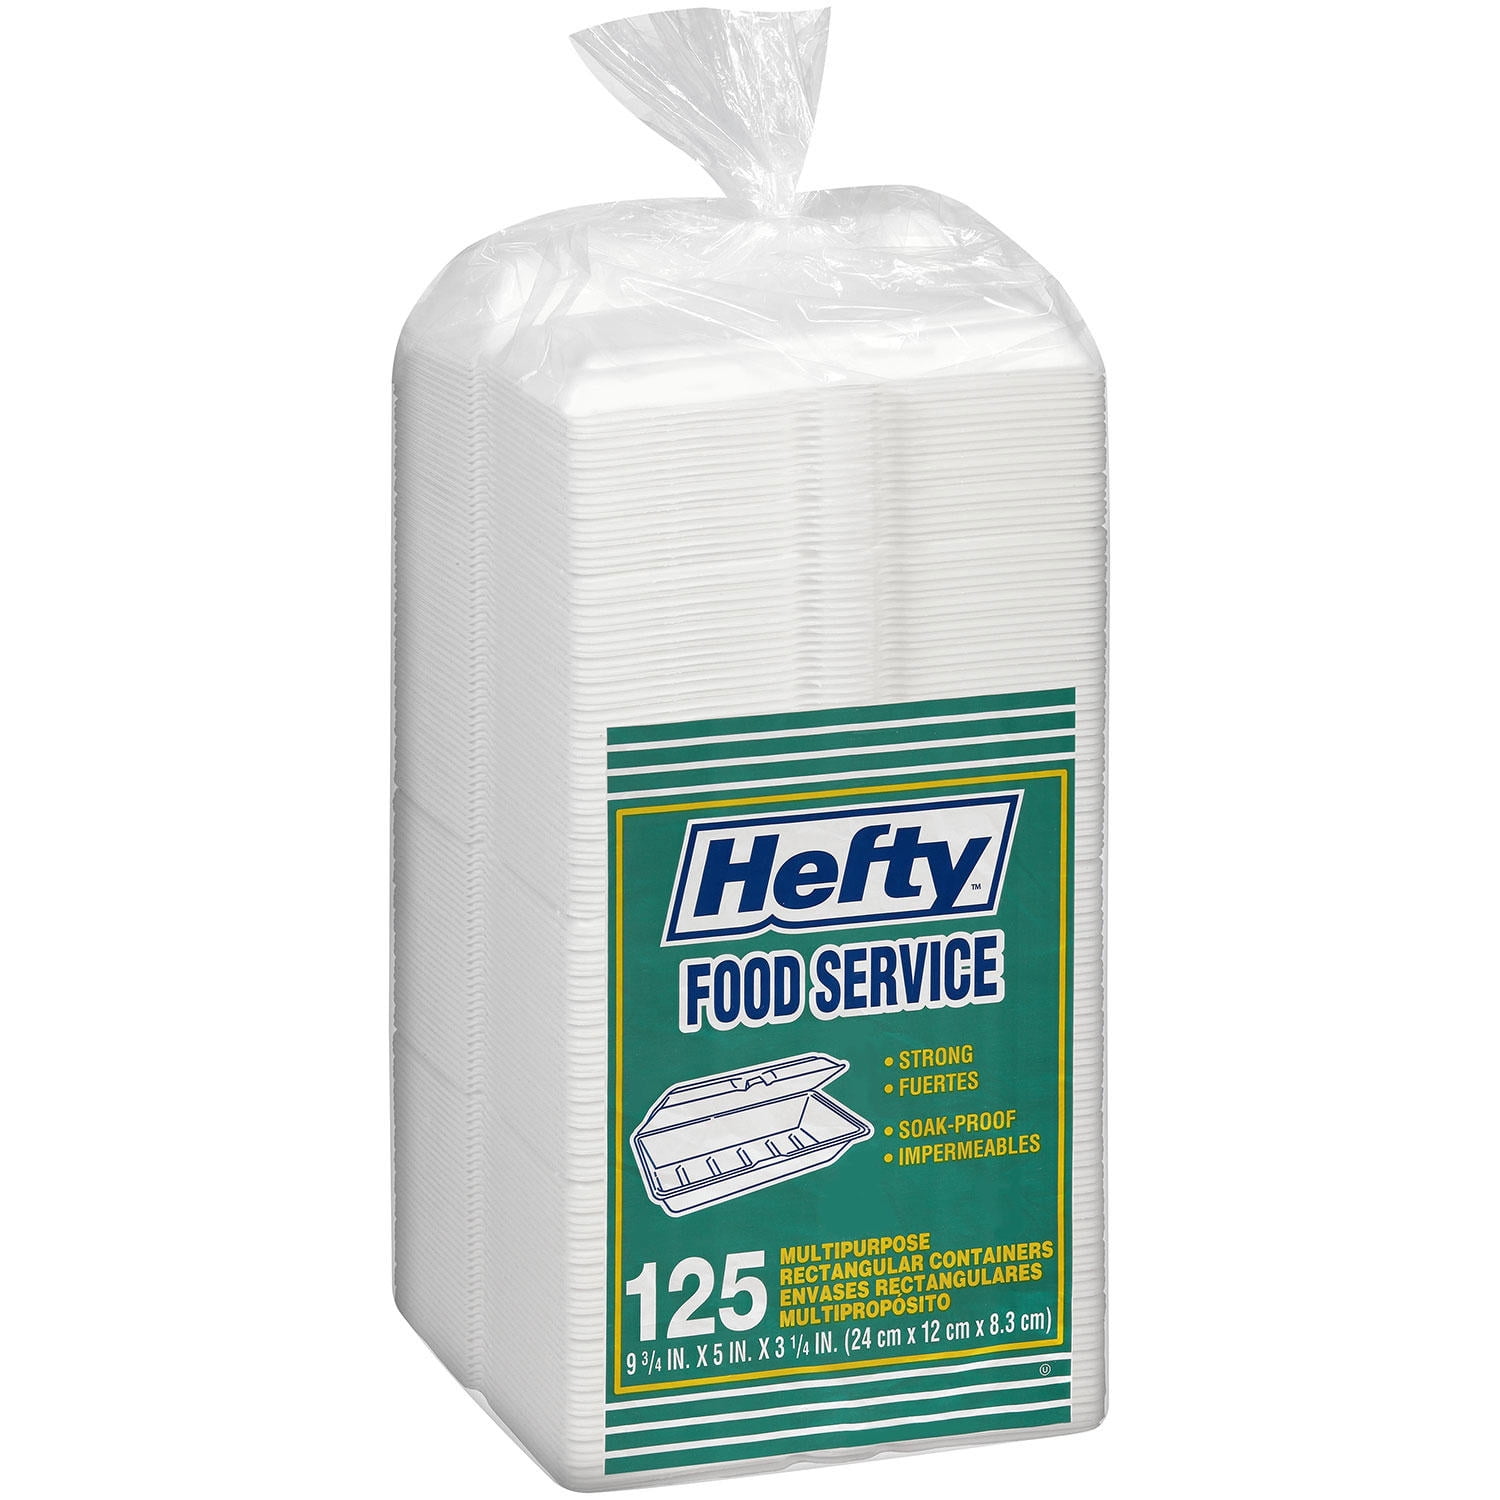 Walmart Muscle Shoals - Get real Hefty with these Hefty Hi-rise 113 quart  storage totes! $18.98 Thanks for your business as always!